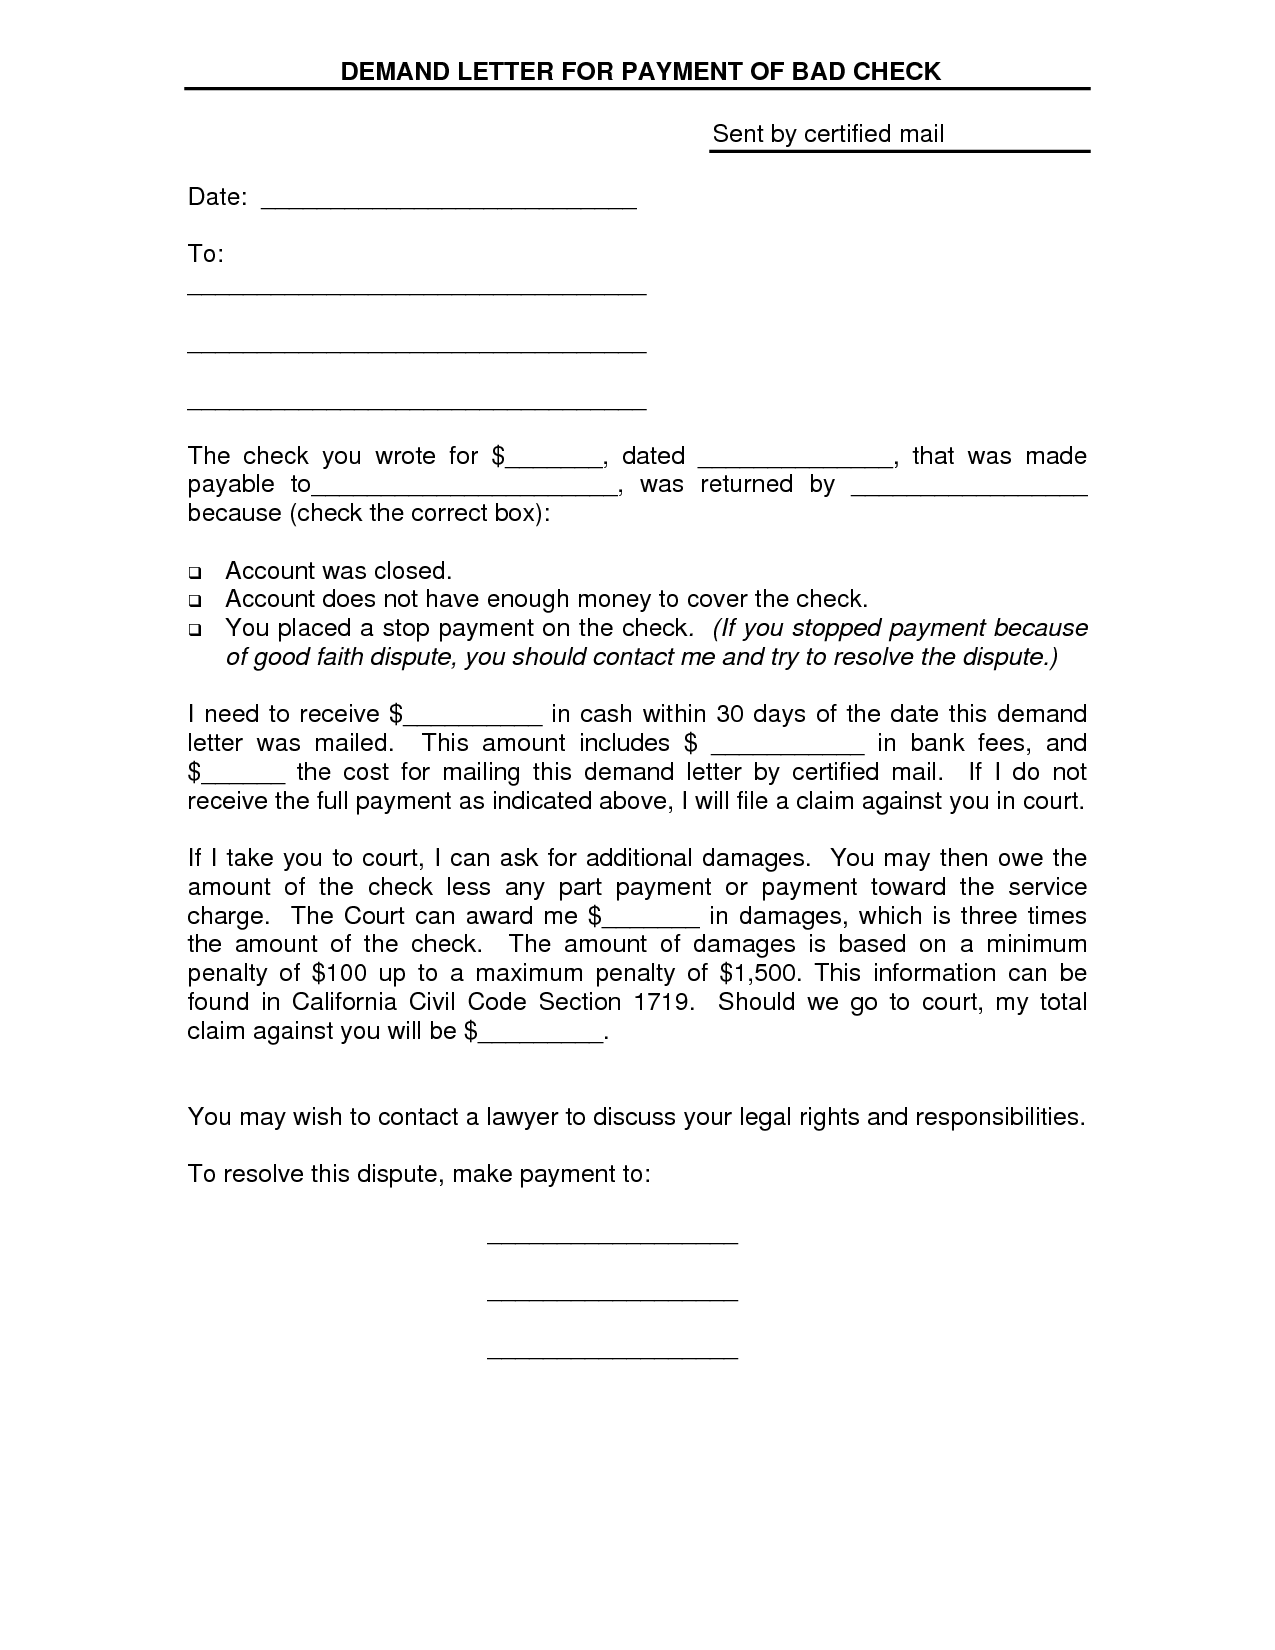 demand-for-payment-letter-template-free-printable-documents